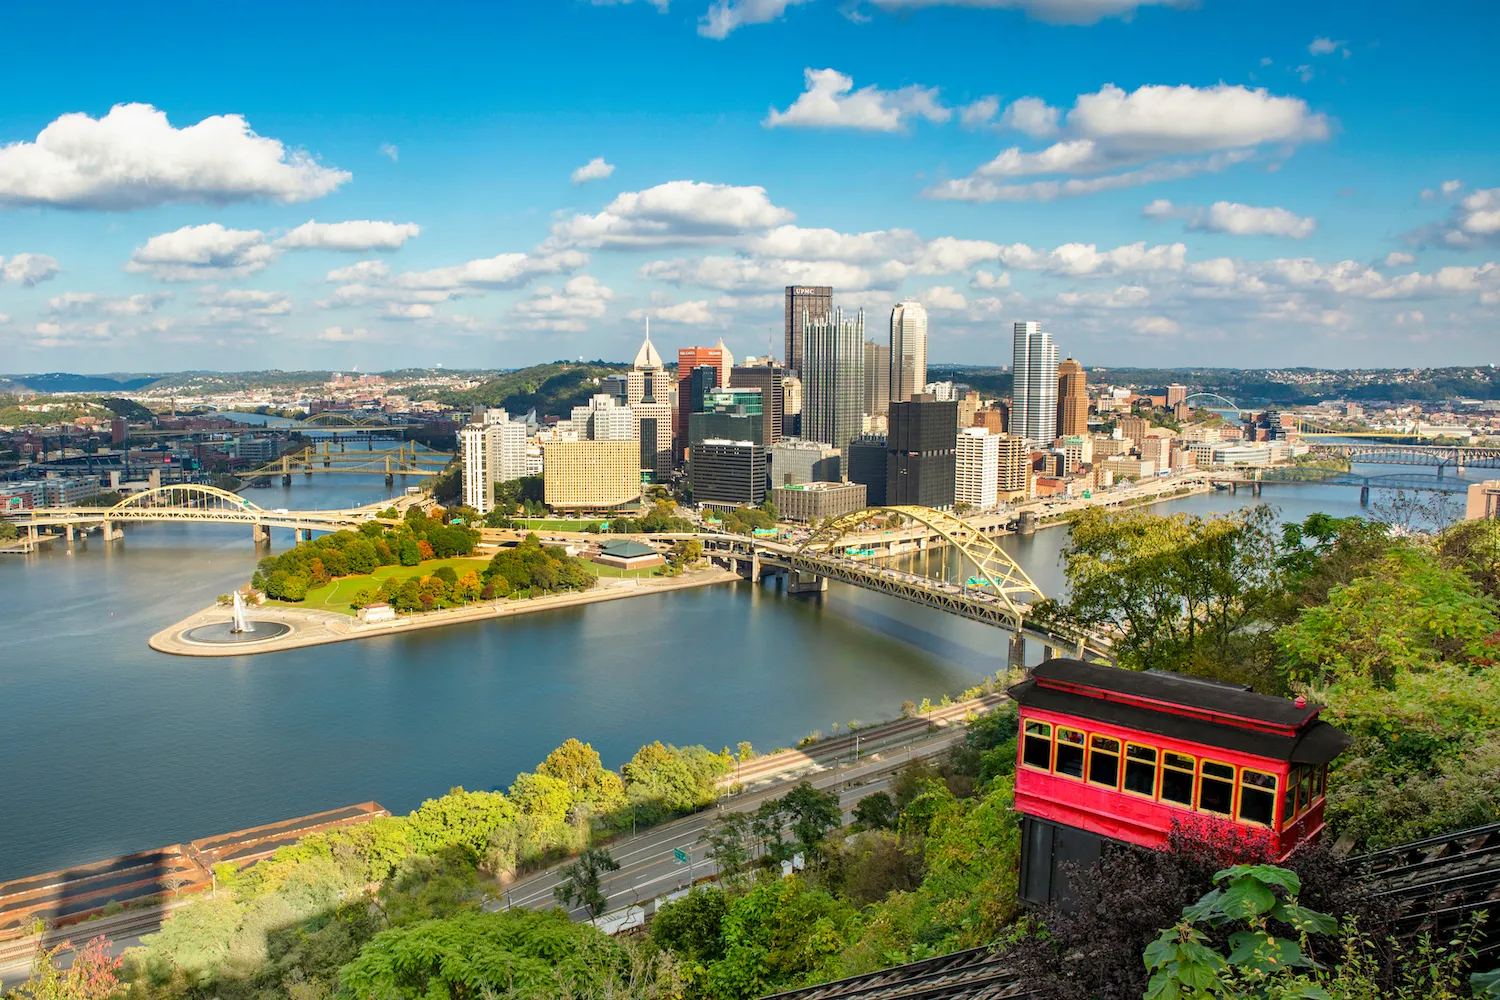 12-facts-about-prominent-industries-and-economic-development-in-pittsburgh-pennsylvania